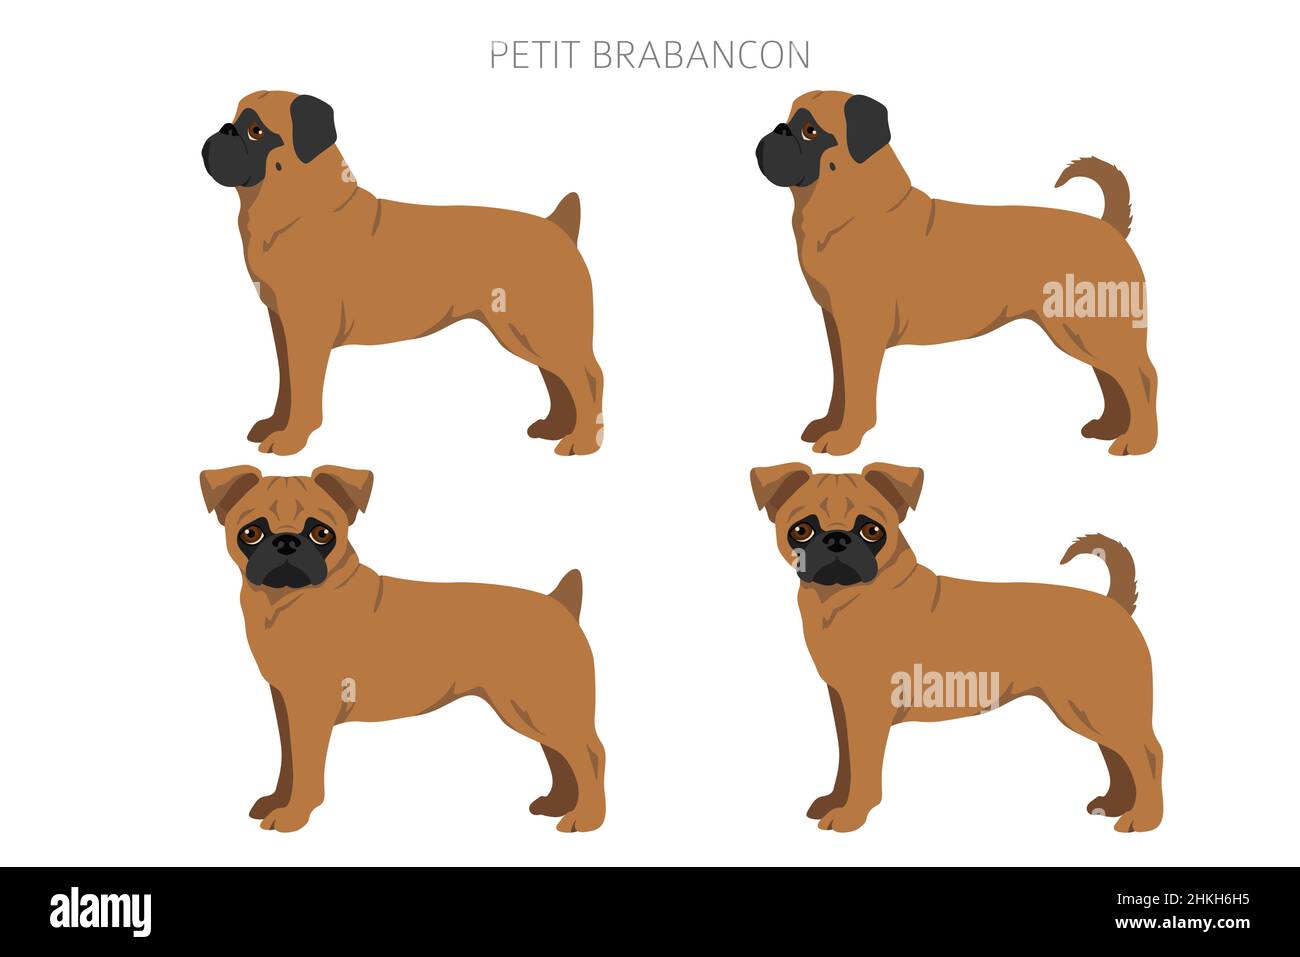 Petit Brabancon, Small Belgian dogs clipart. Different poses, coat colors set.  Vector illustration Stock Vector